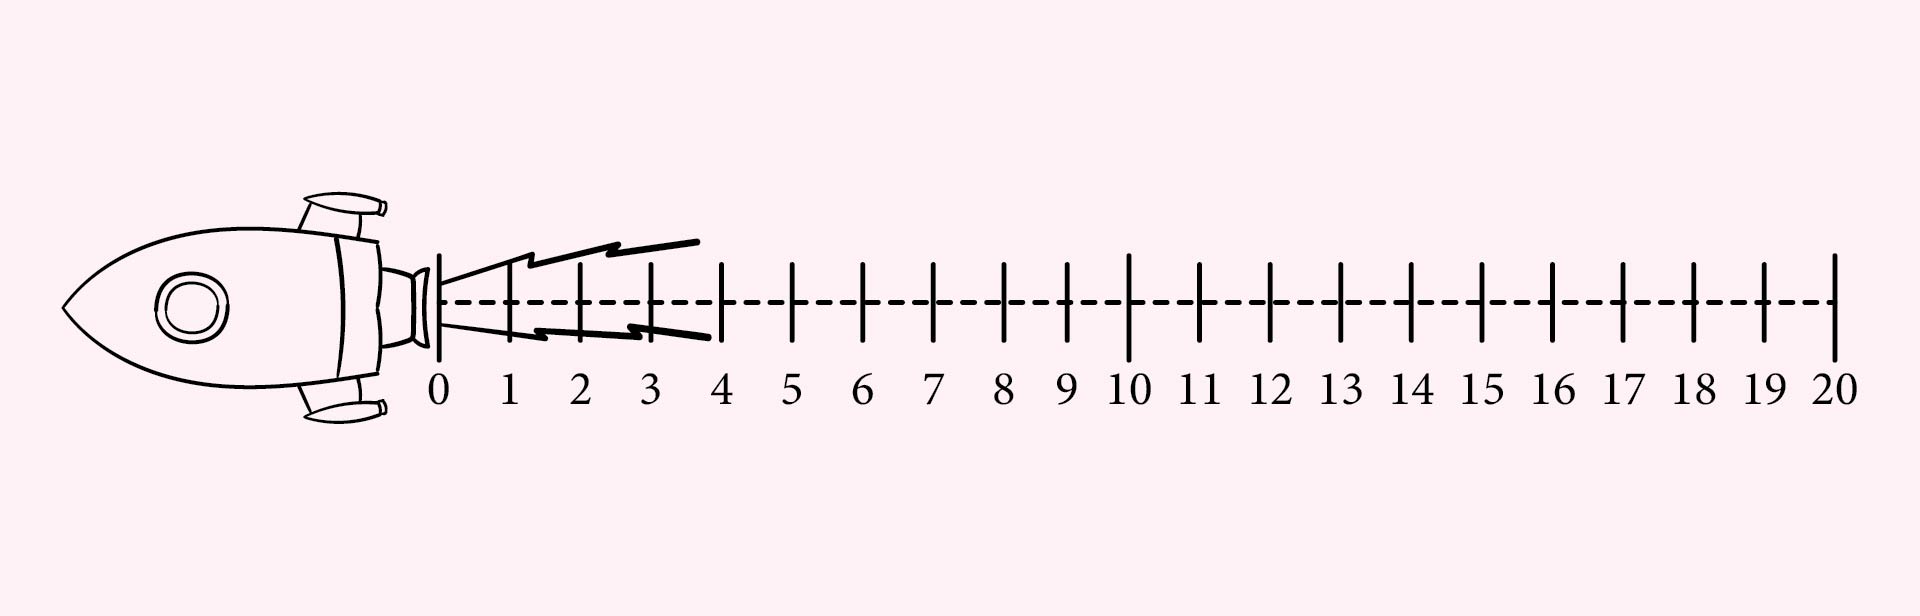 9 Best Images of Free Printable Number Line 120